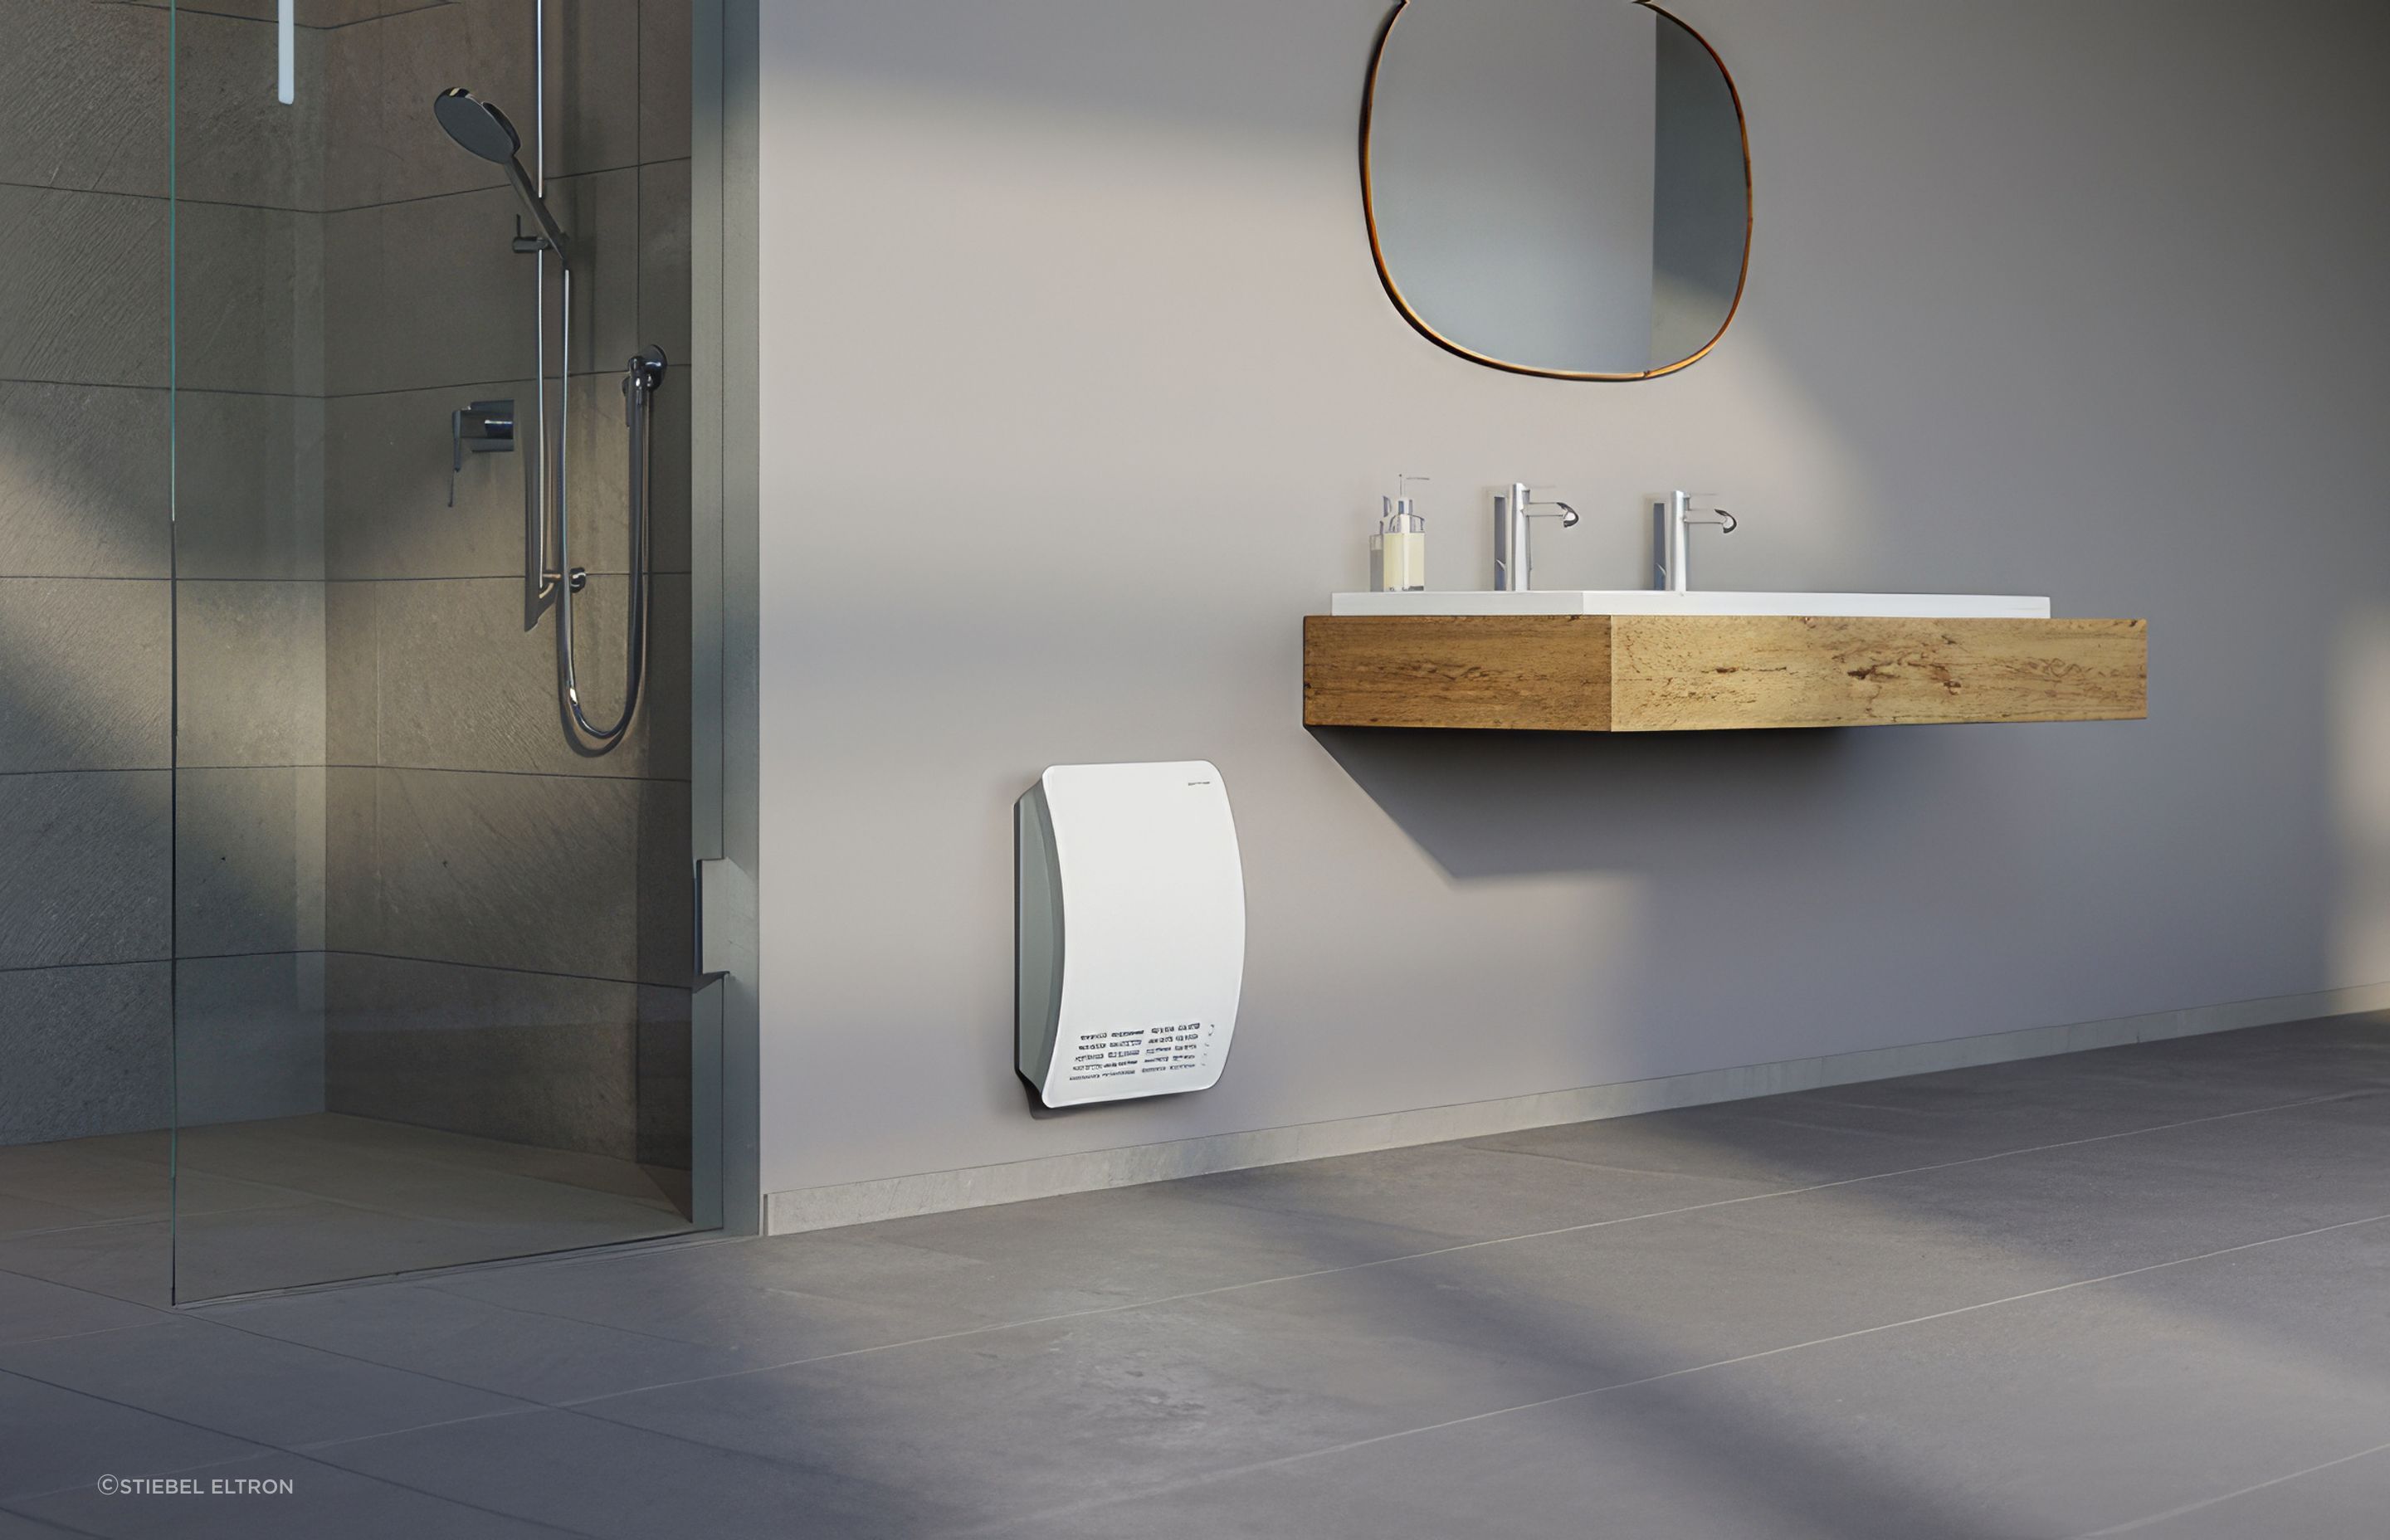 With many adjustable features, the CK 20 Plus Fan Assisted Electric Room Heater is the perfect choice for the modern bathroom.